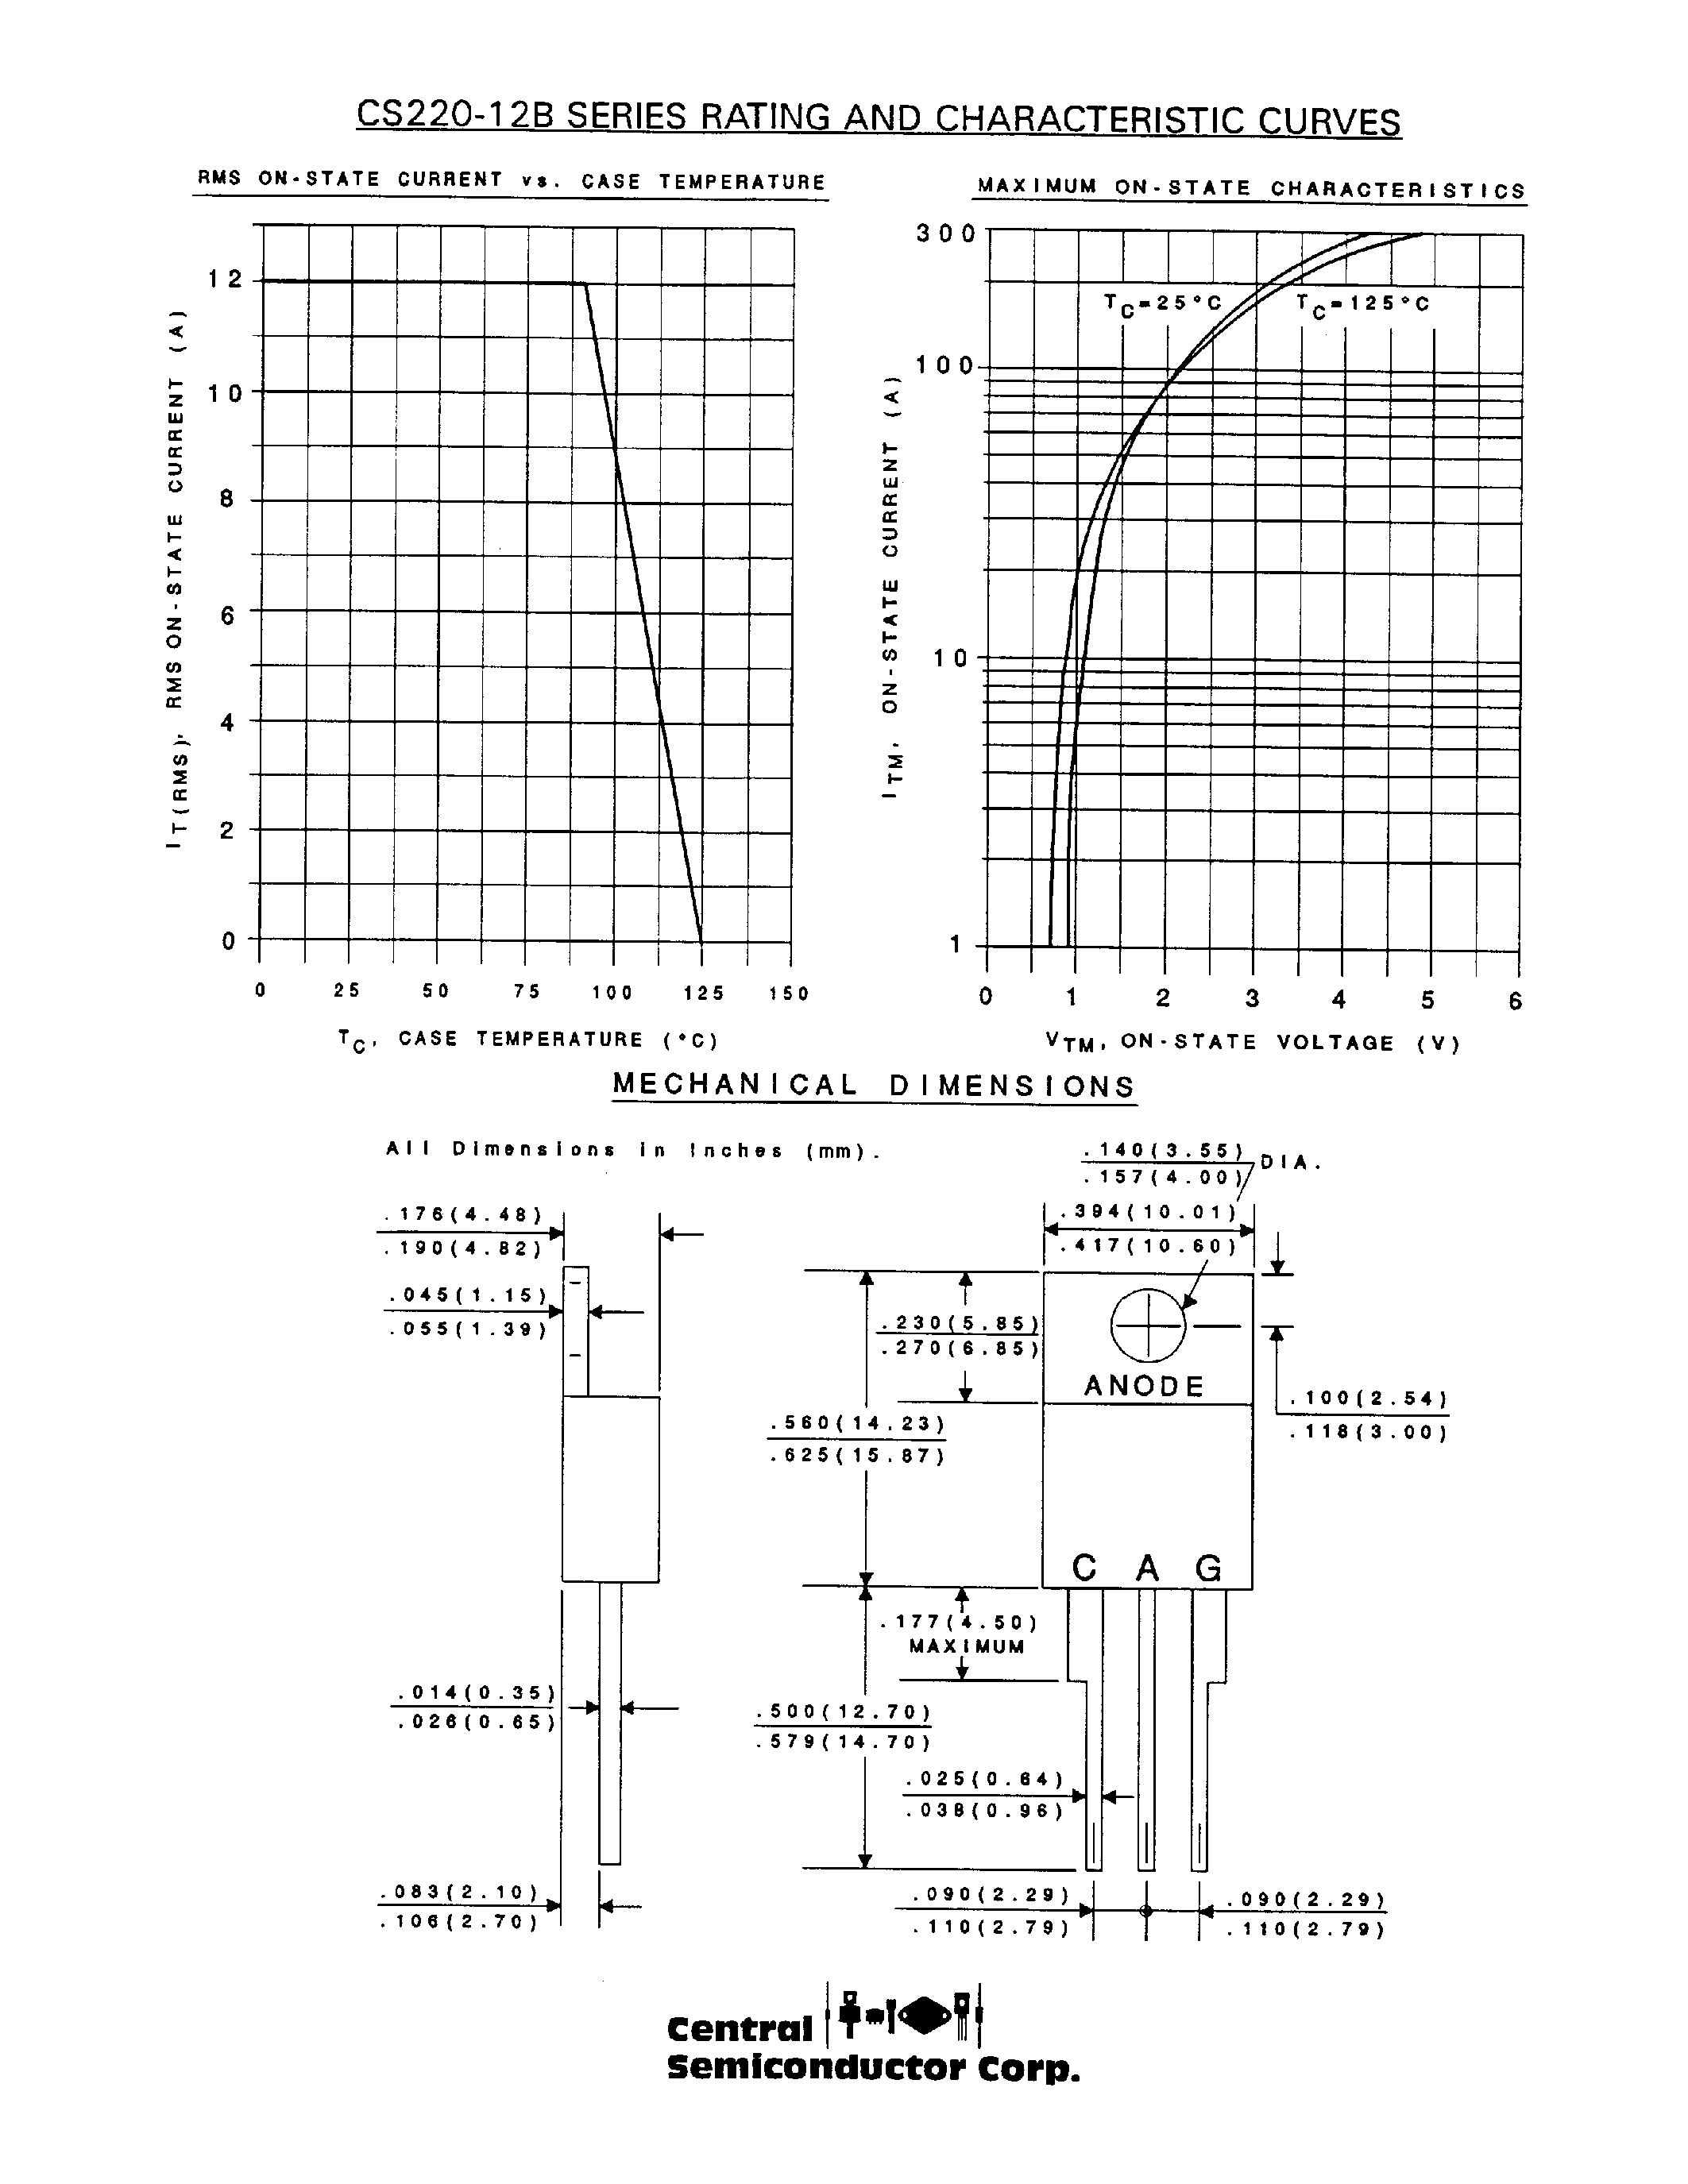 Datasheet CS220-12N - SILICON CONTROLLED RECTIFIER 12 AMP/ 200 THRU 1000 VOLTS page 2